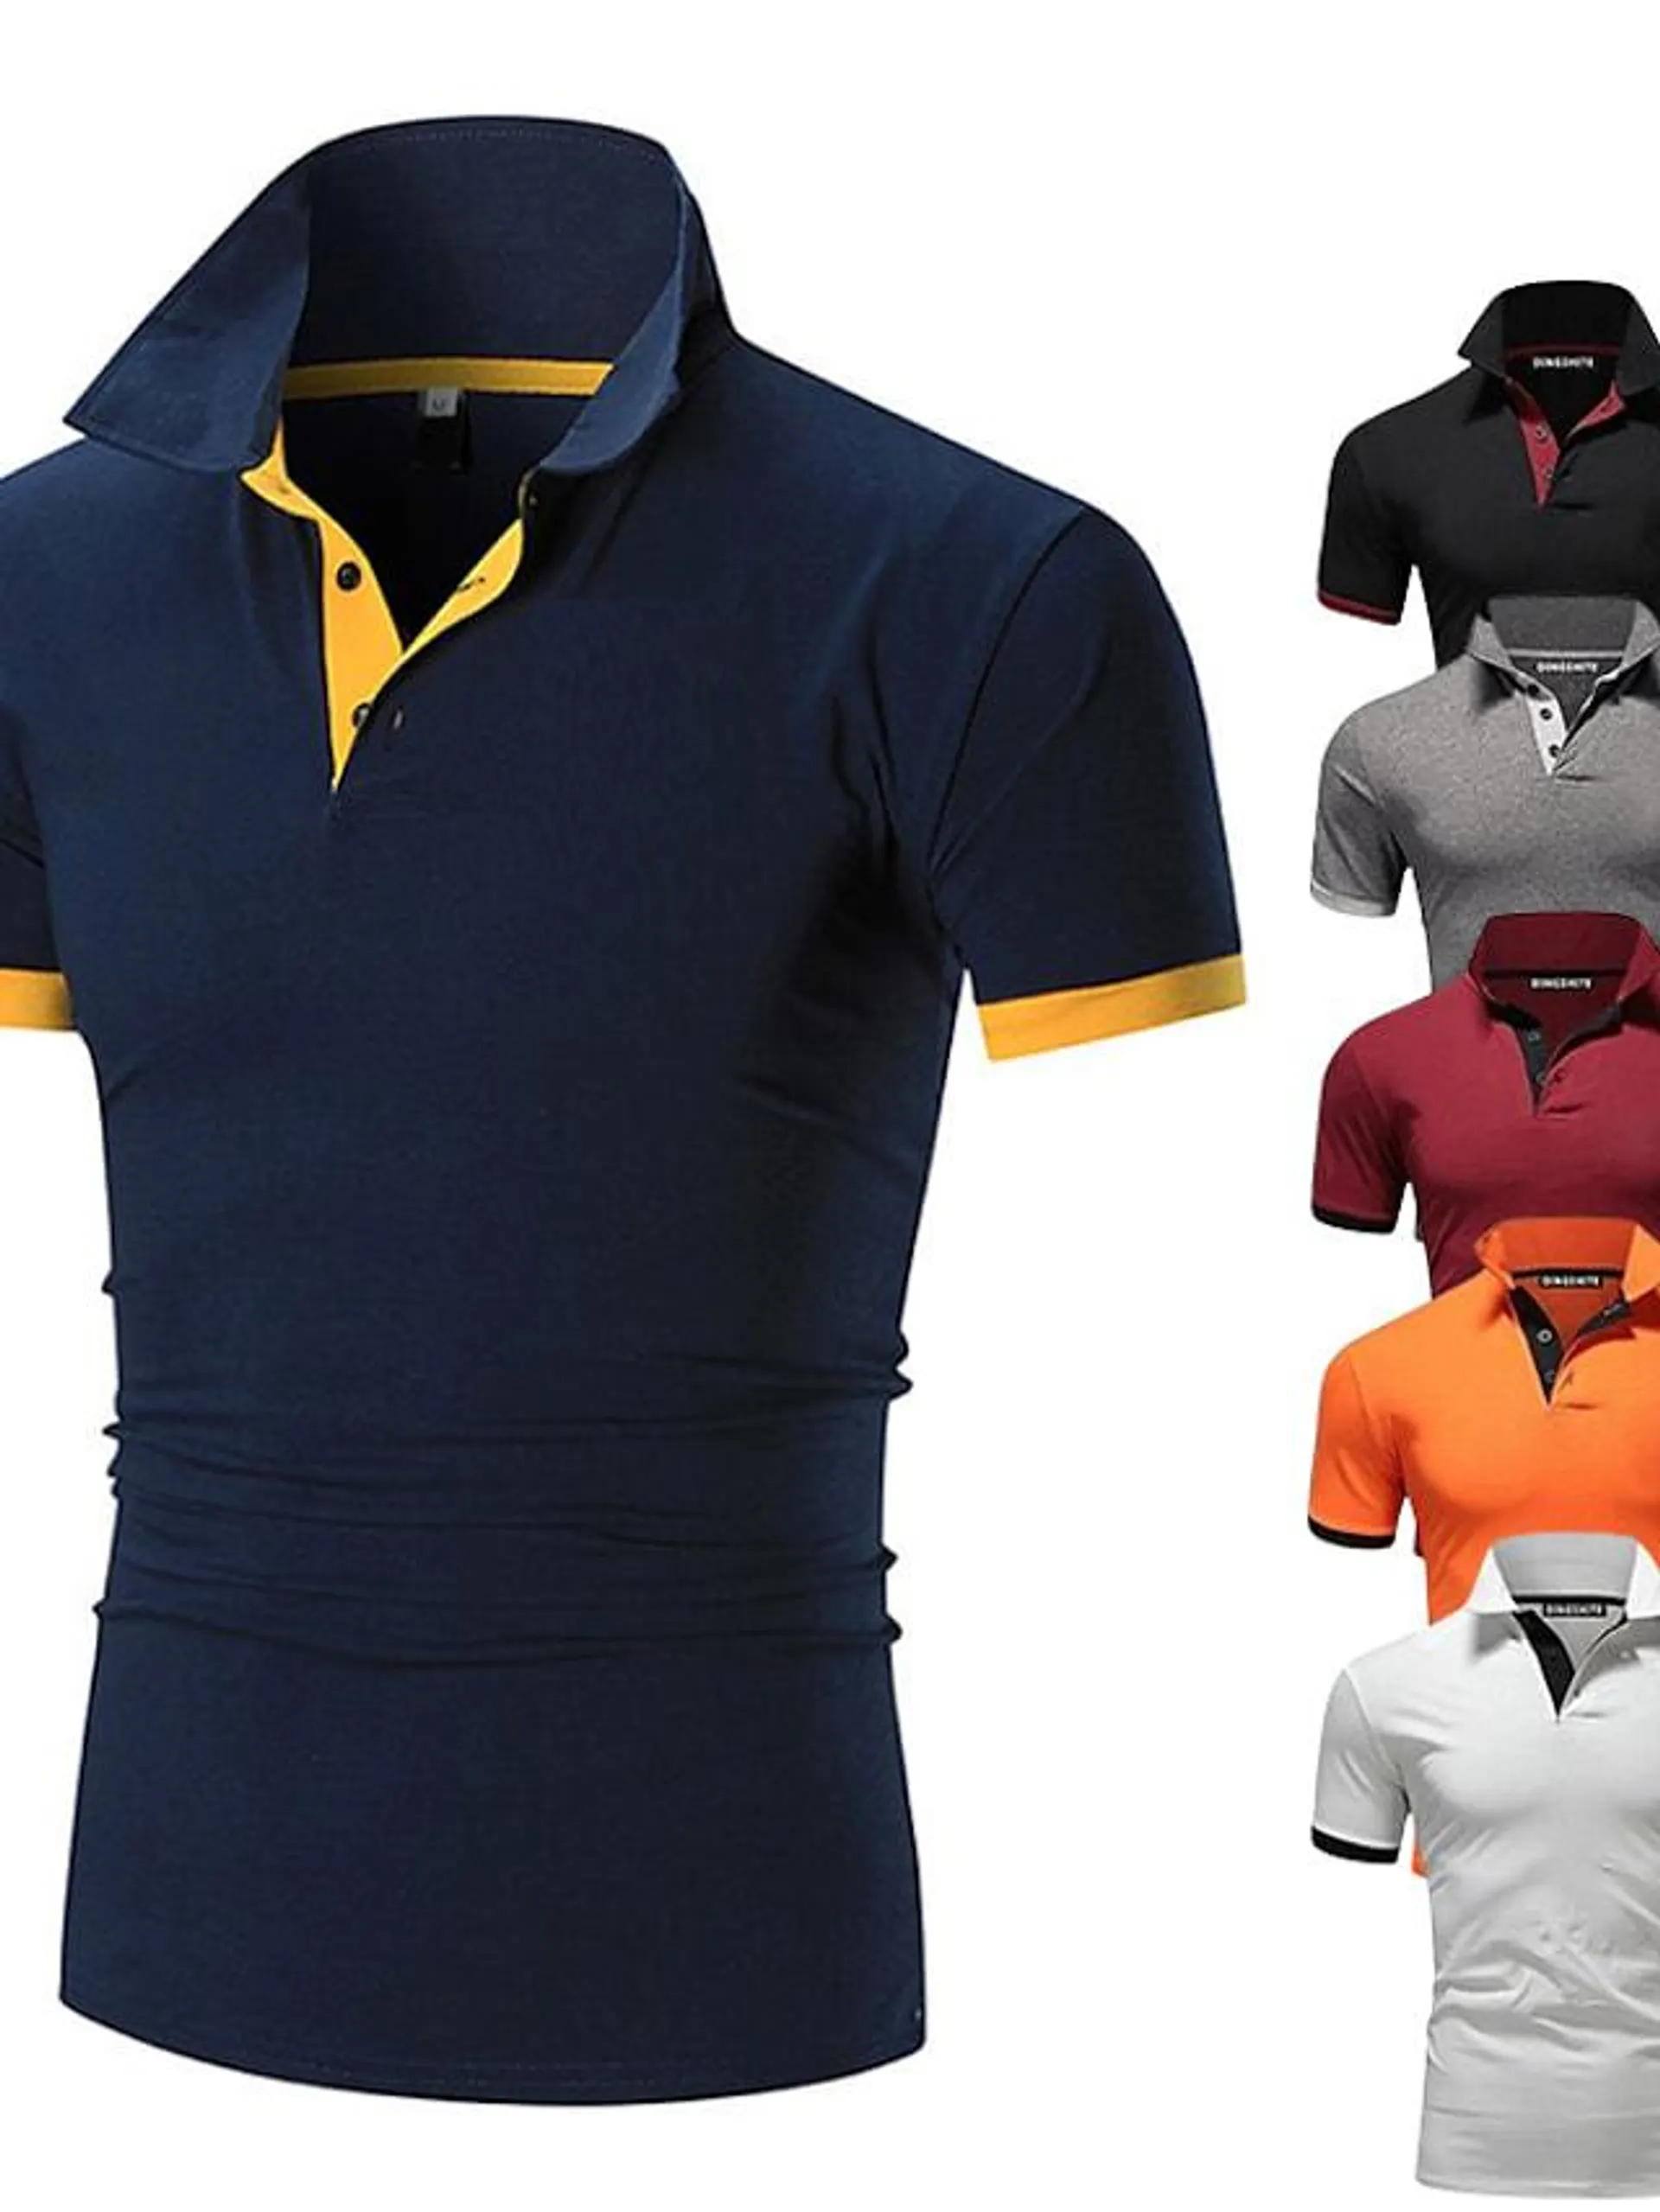 Men's Polo Golf Shirt Casual Sports Classic Short Sleeve Basic Casual Solid Color Plain Button Front Summer Spring Regular Fit Black White Wine Navy Blue Orange Dark Gray Polo